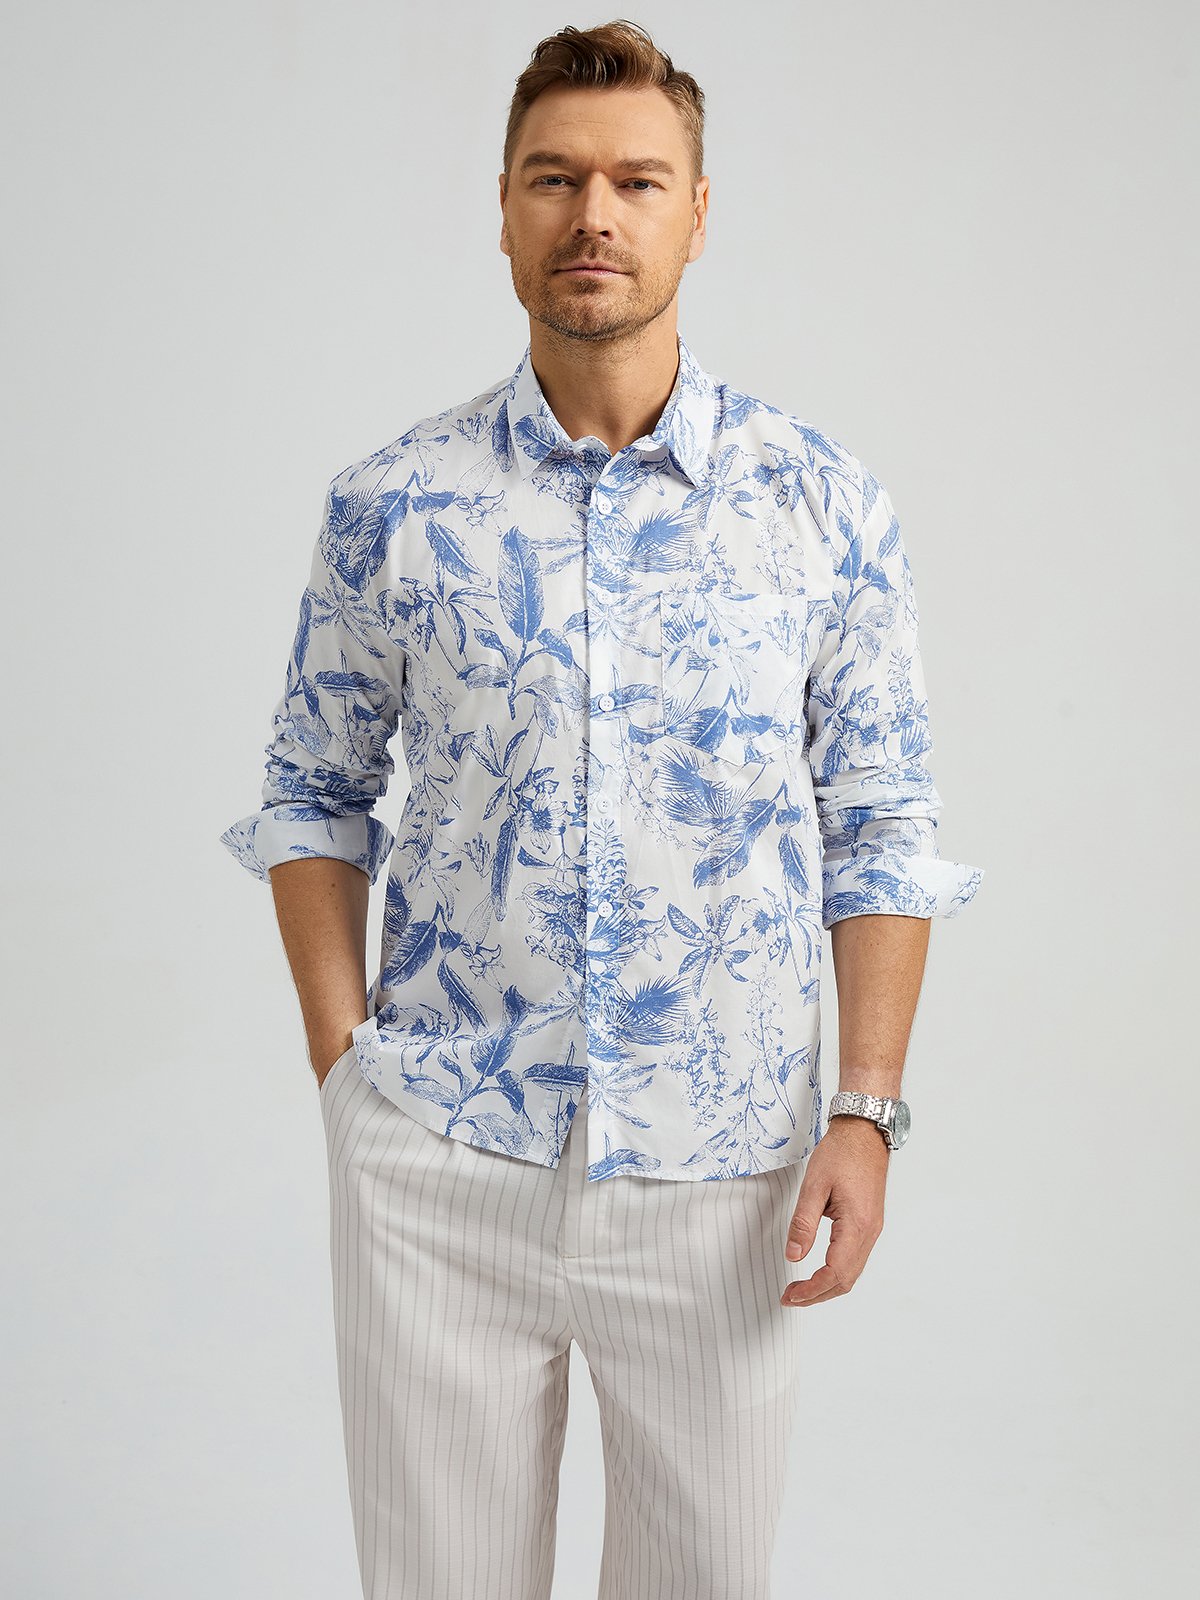 Hardaddy Floral Chest Pocket Long Sleeve Casual Shirt